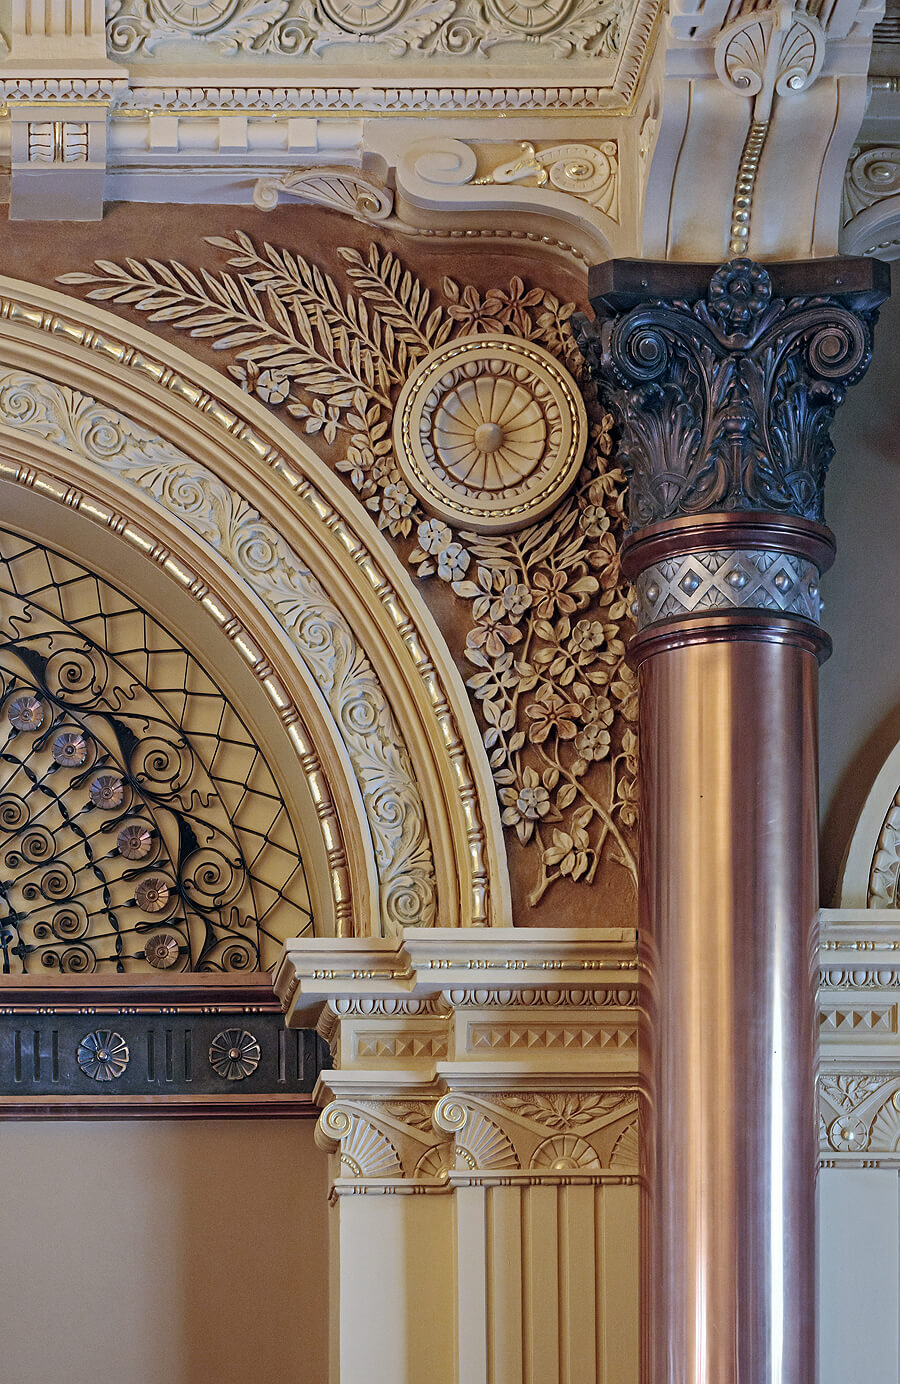 Picture of historic historic features including a copper column and decorative plaster.